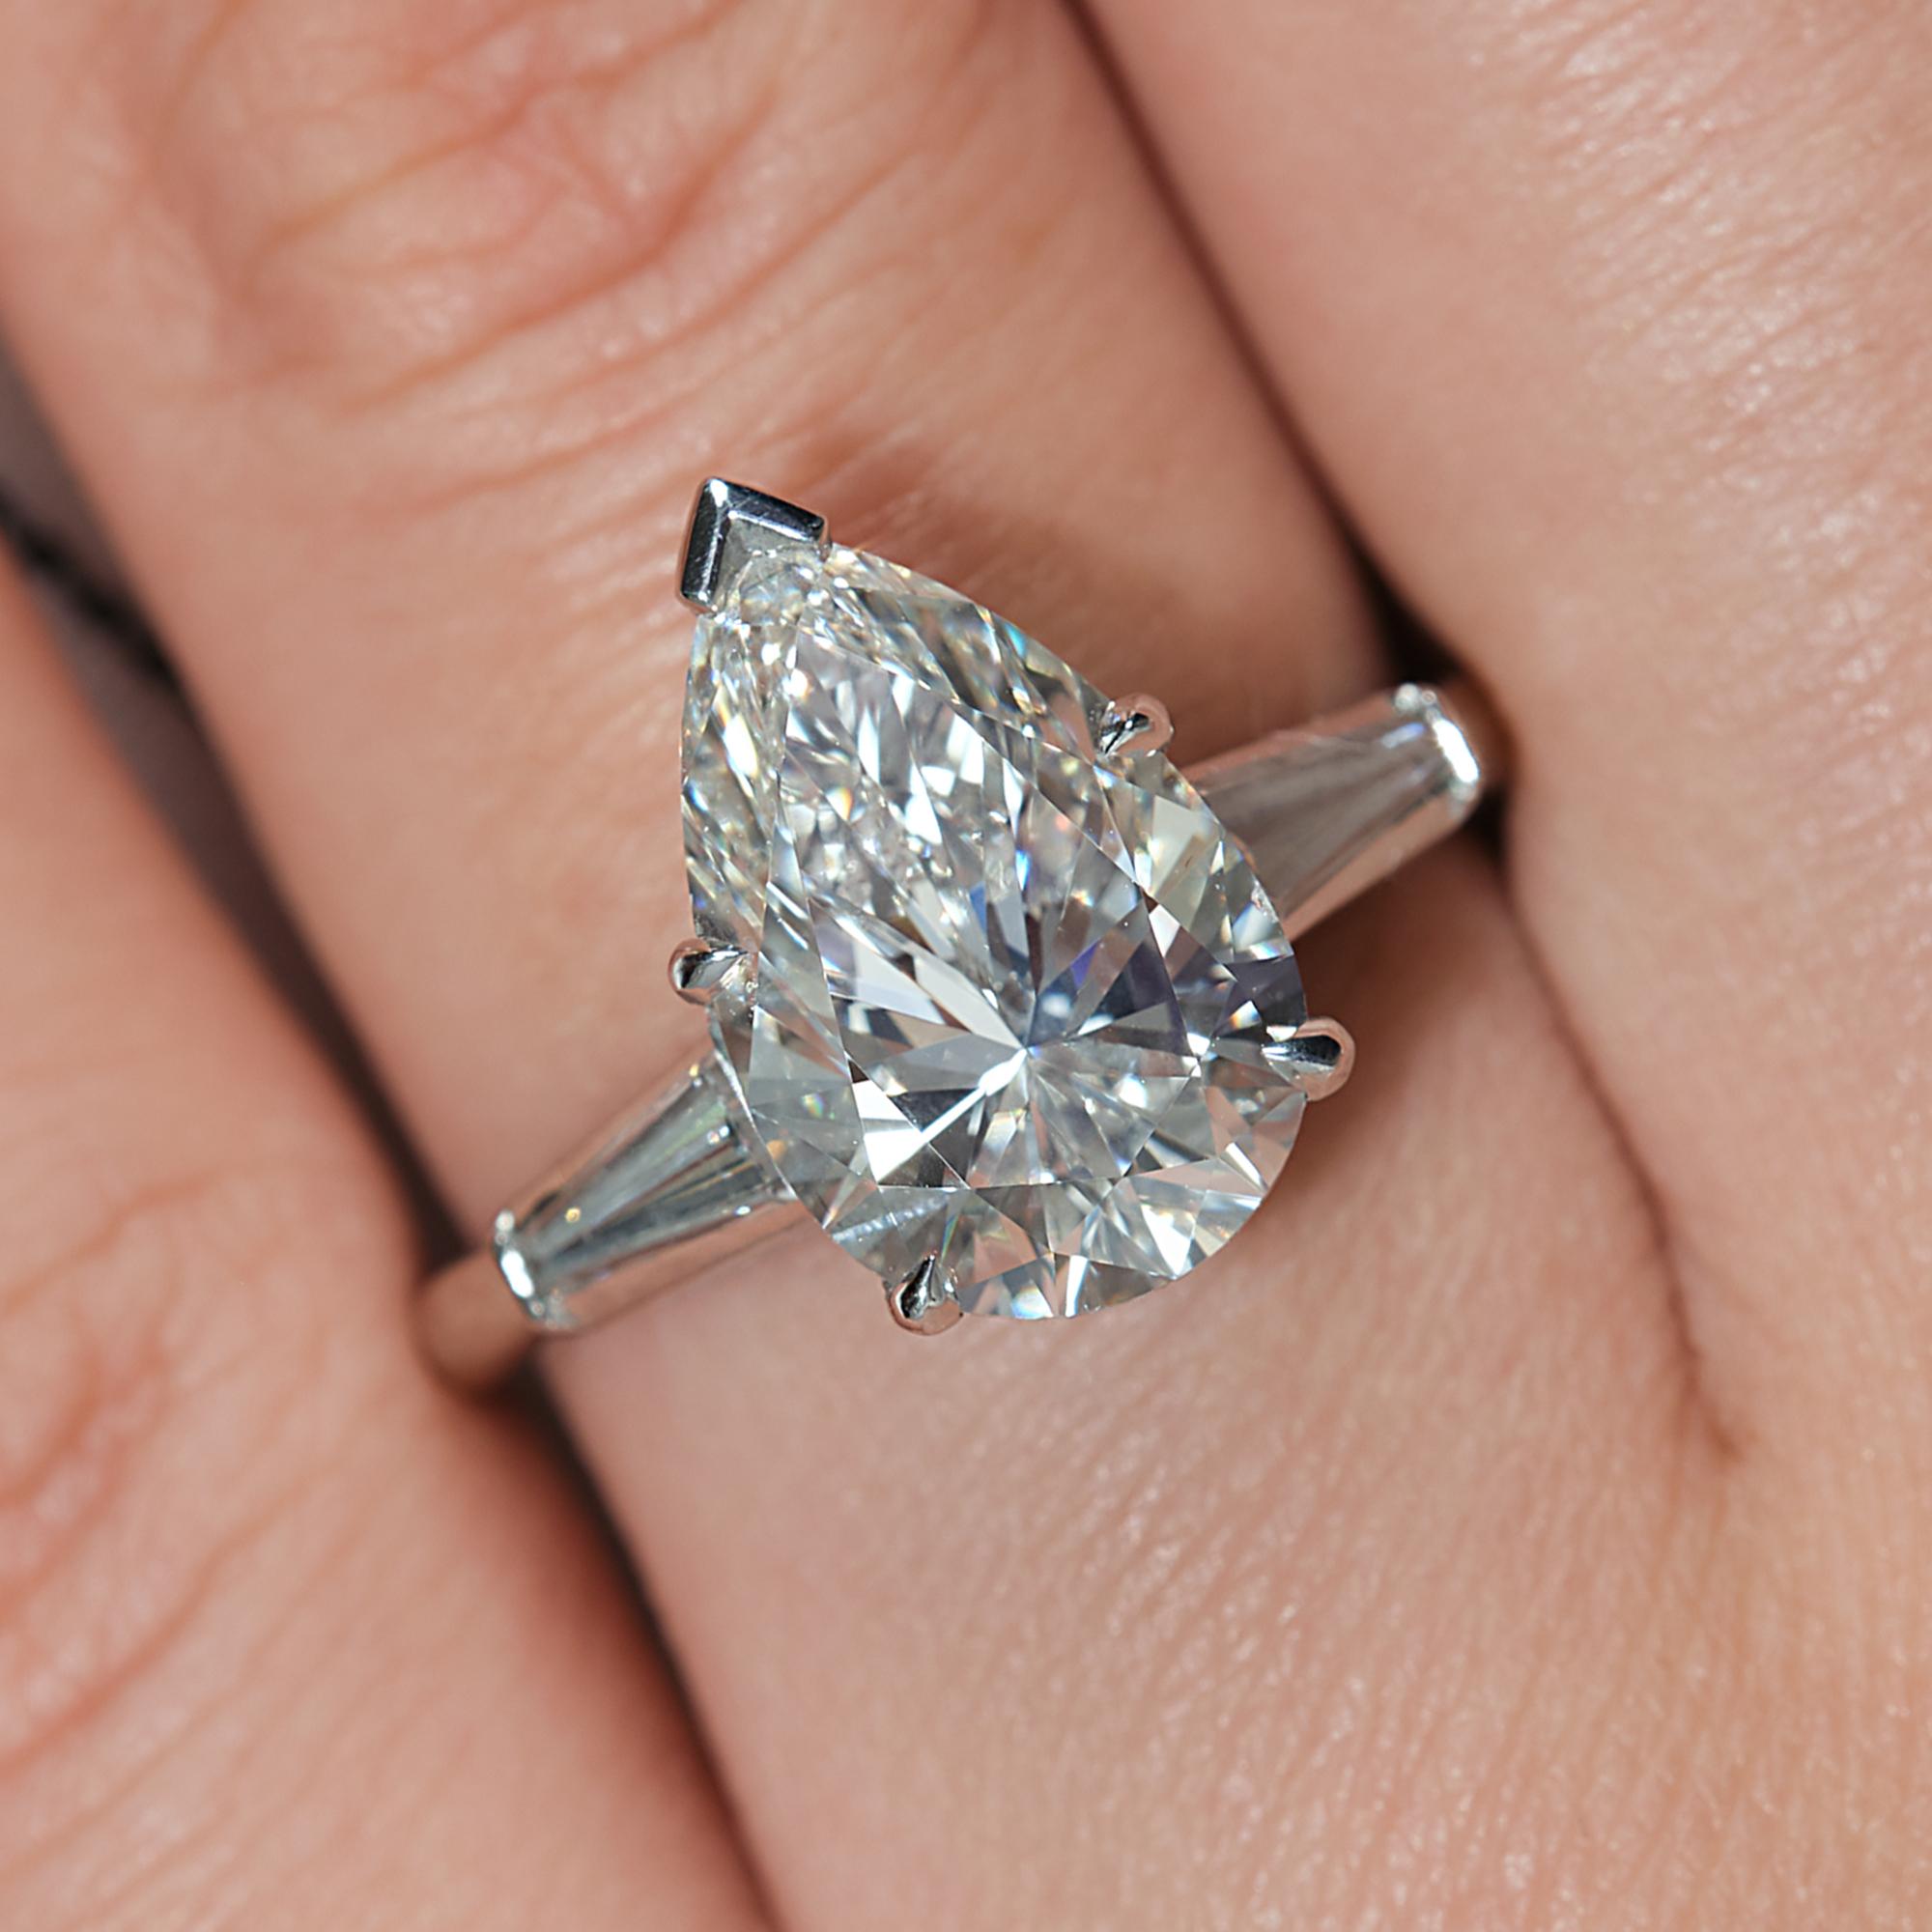 This a Beautiful, the most timeless and classic style - Estate Vintage 3 Stone Pear Shaped Ring with 2 Large baguettes weighing in total 4.51ctw. 
Buy her this exquisite and the most classic, elegant diamond ring which will go beyond her